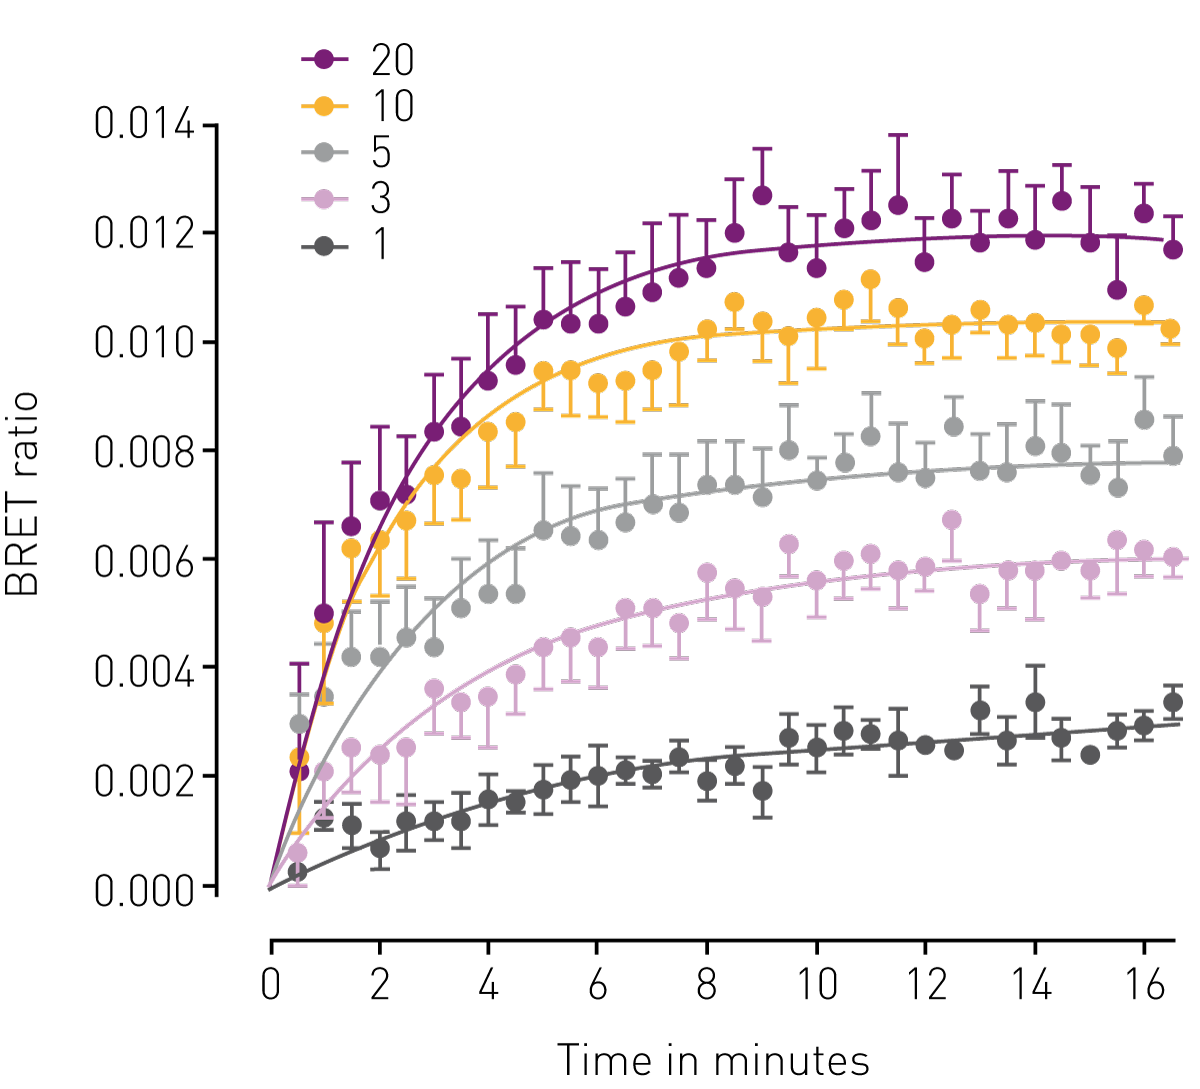 Fig. 2: Ligand binding kinetics of VEGF165a-TMR to NLuc-VEGFR2 in HEK293 cells. Furimazine was added to each well and after 5 min of equilibration the reaction was started by adding VEGF165a-TMR at the indicated concentration (in nM). Data taken from reference 1.